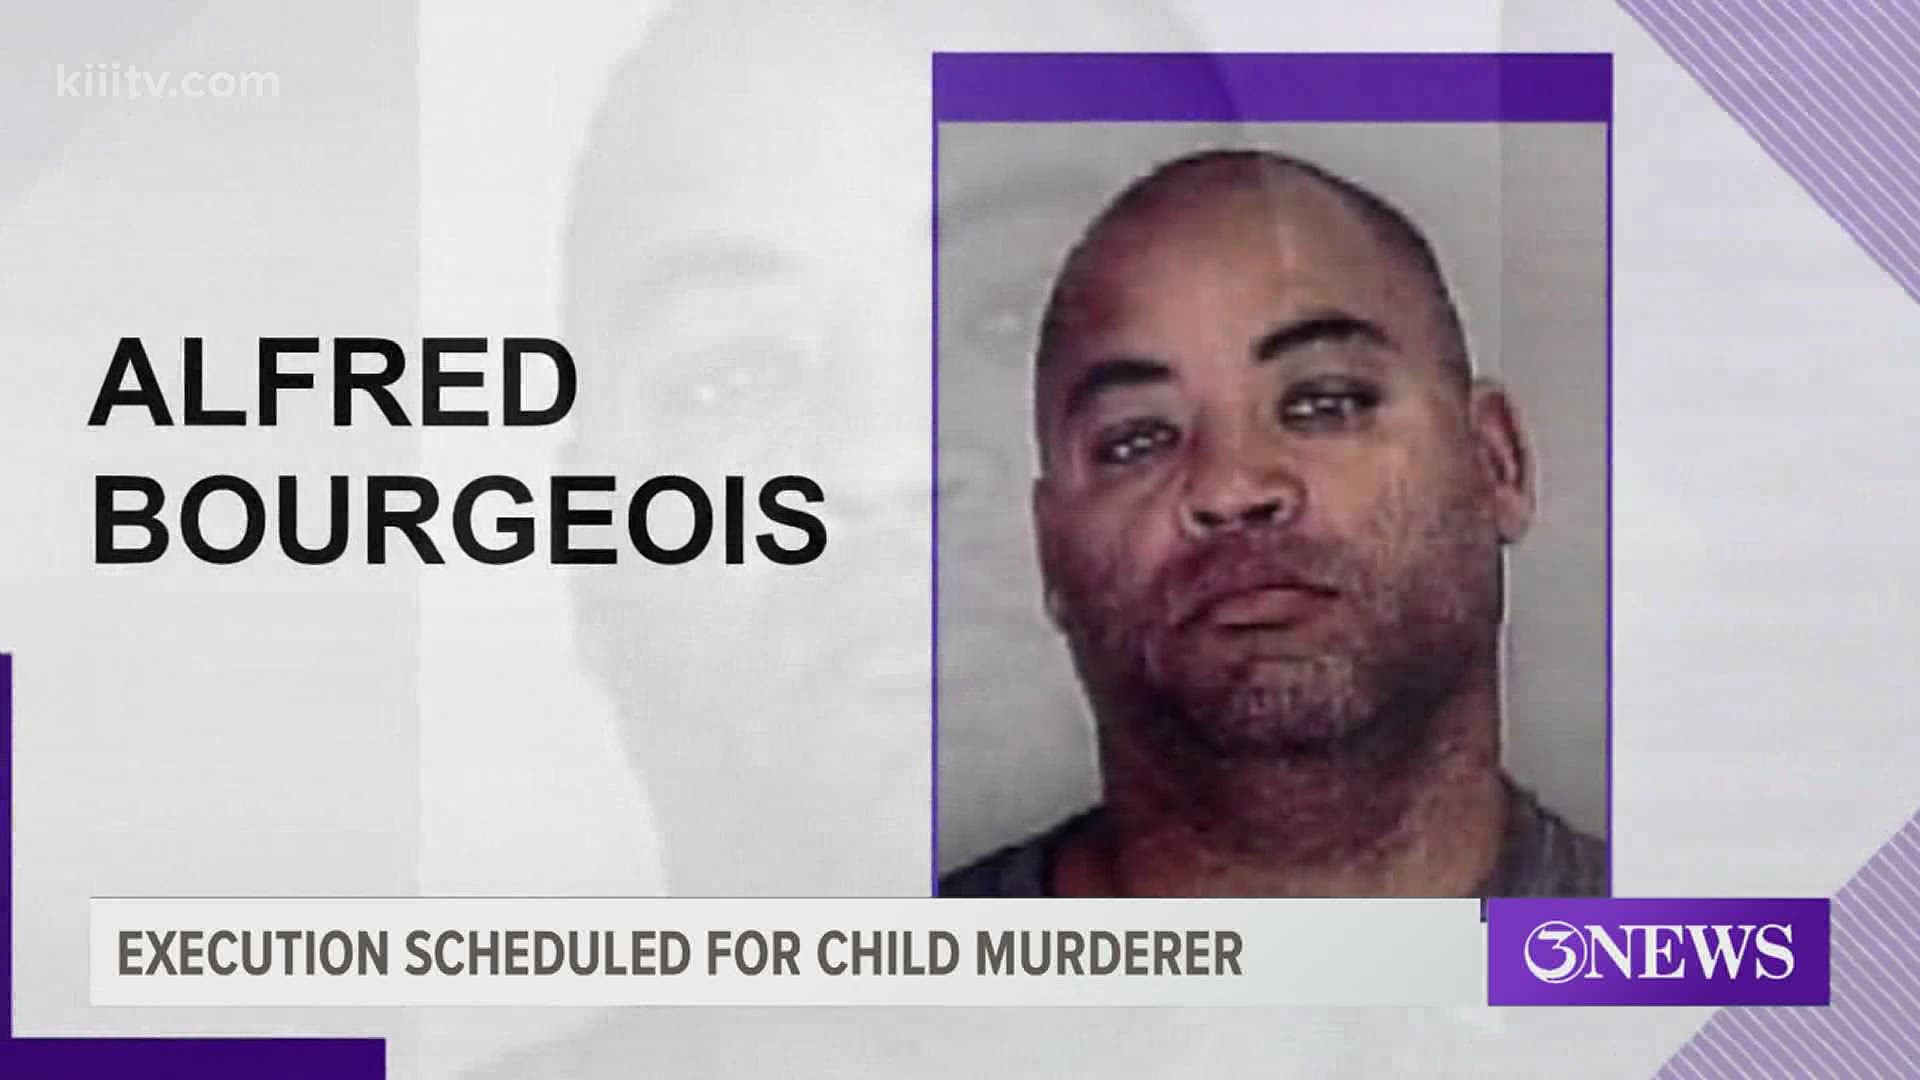 Alfred Bourgeois' execution is set for December 11. This comes after murdering his two year old daughter in 2002.